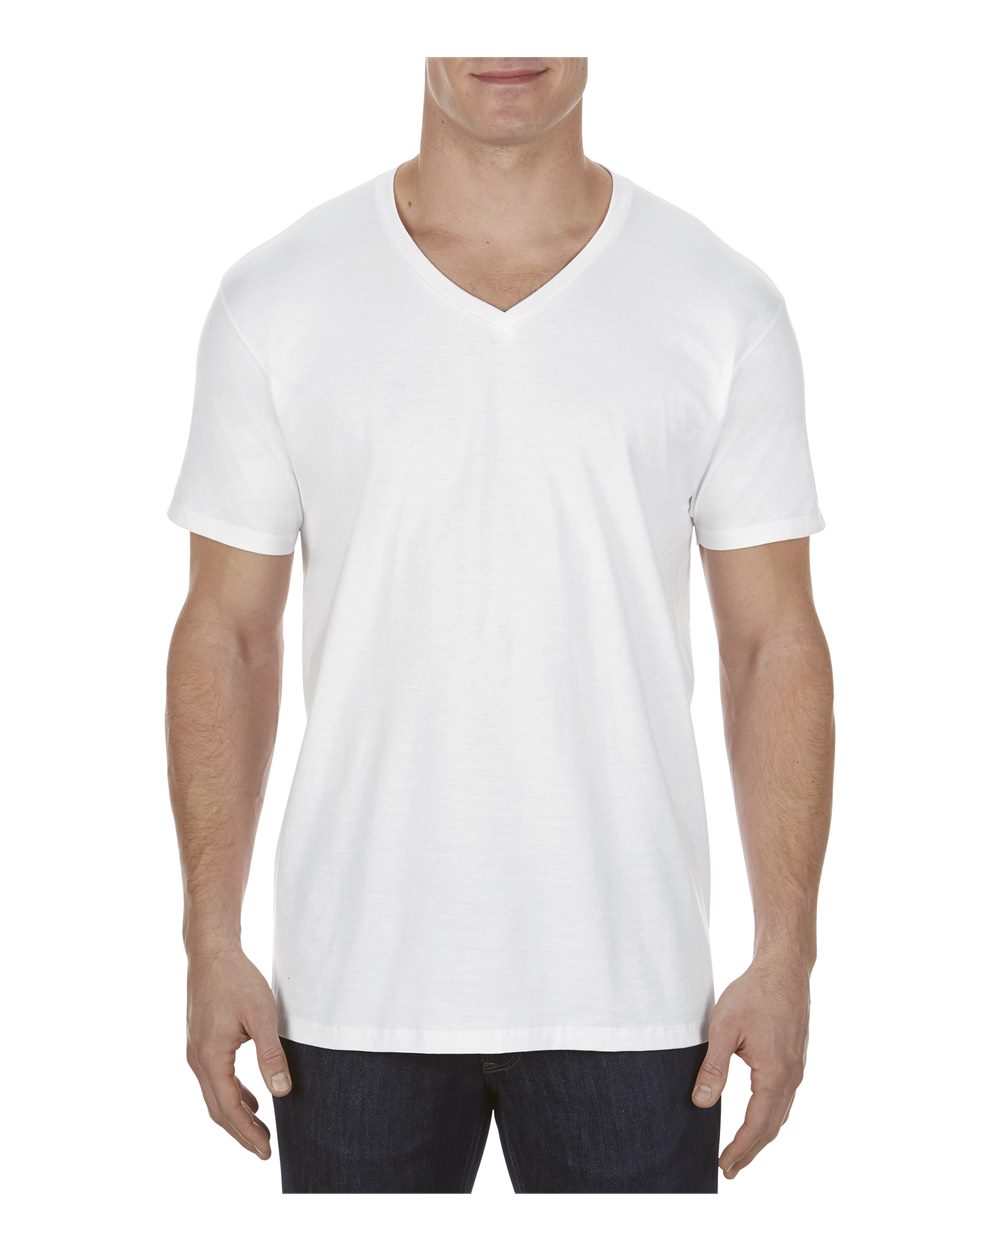 Alstyle 5300 - Ultimate V-Neck Tee